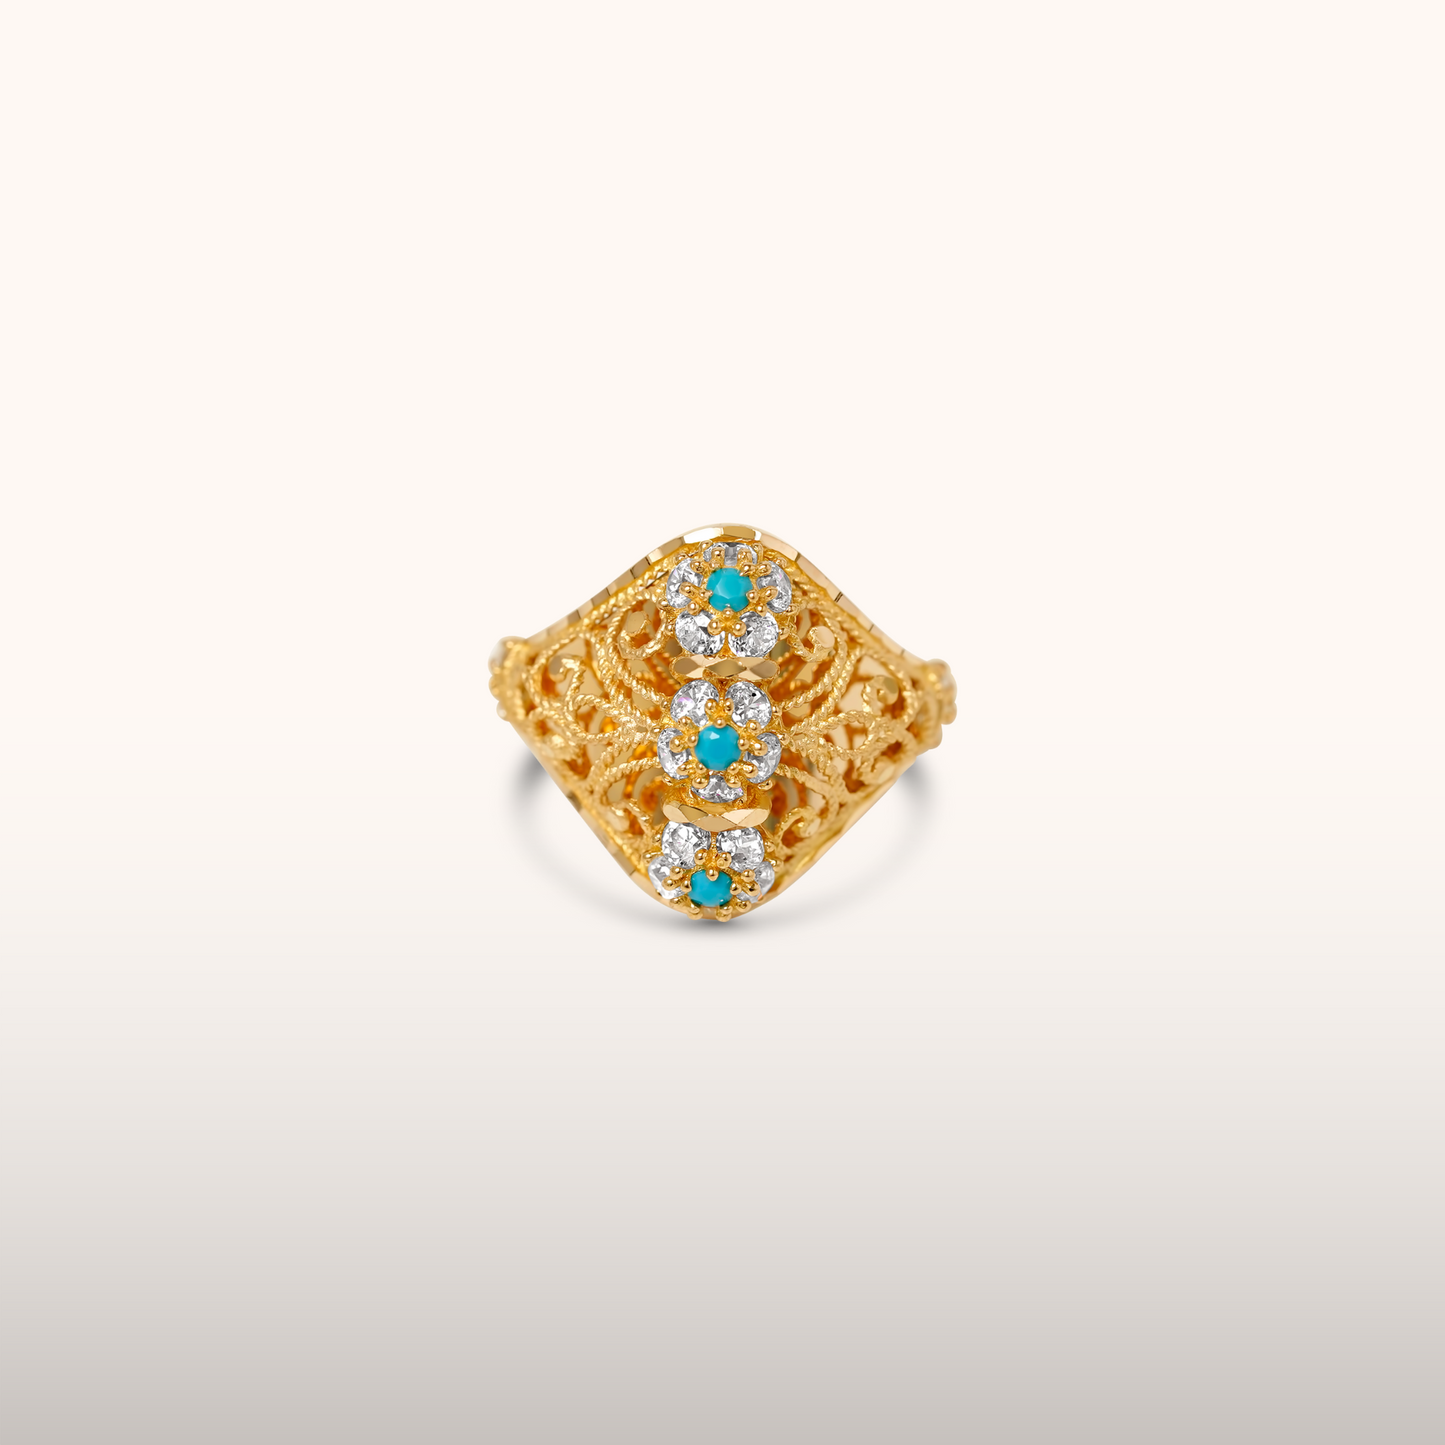 21k Bahraini Gold Ring with Turquoise Stones